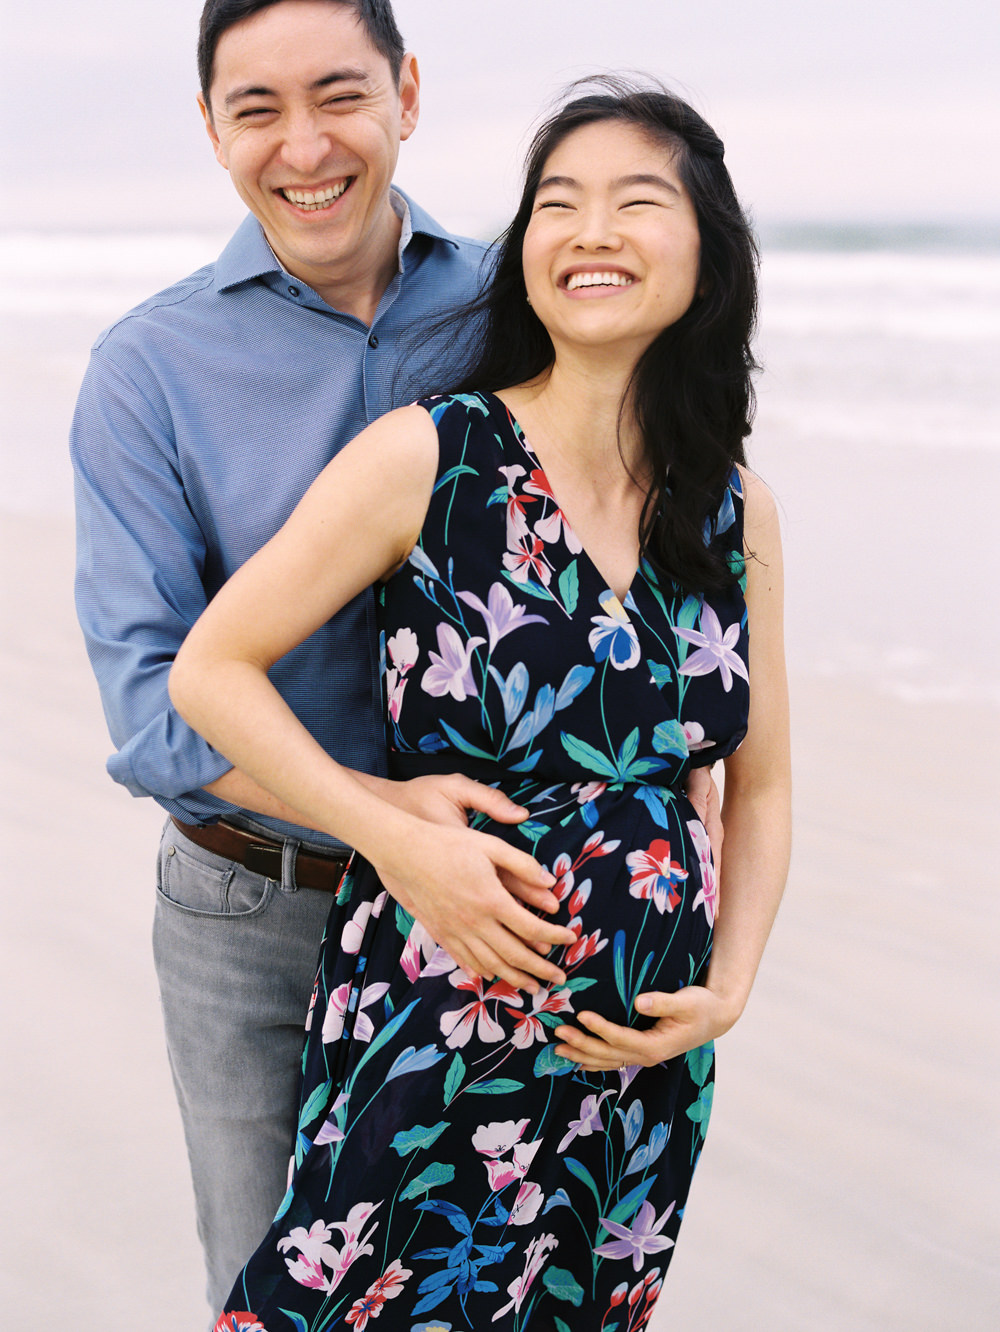 man standing behind woman with his hands on her pregnant belly as they smile and laugh